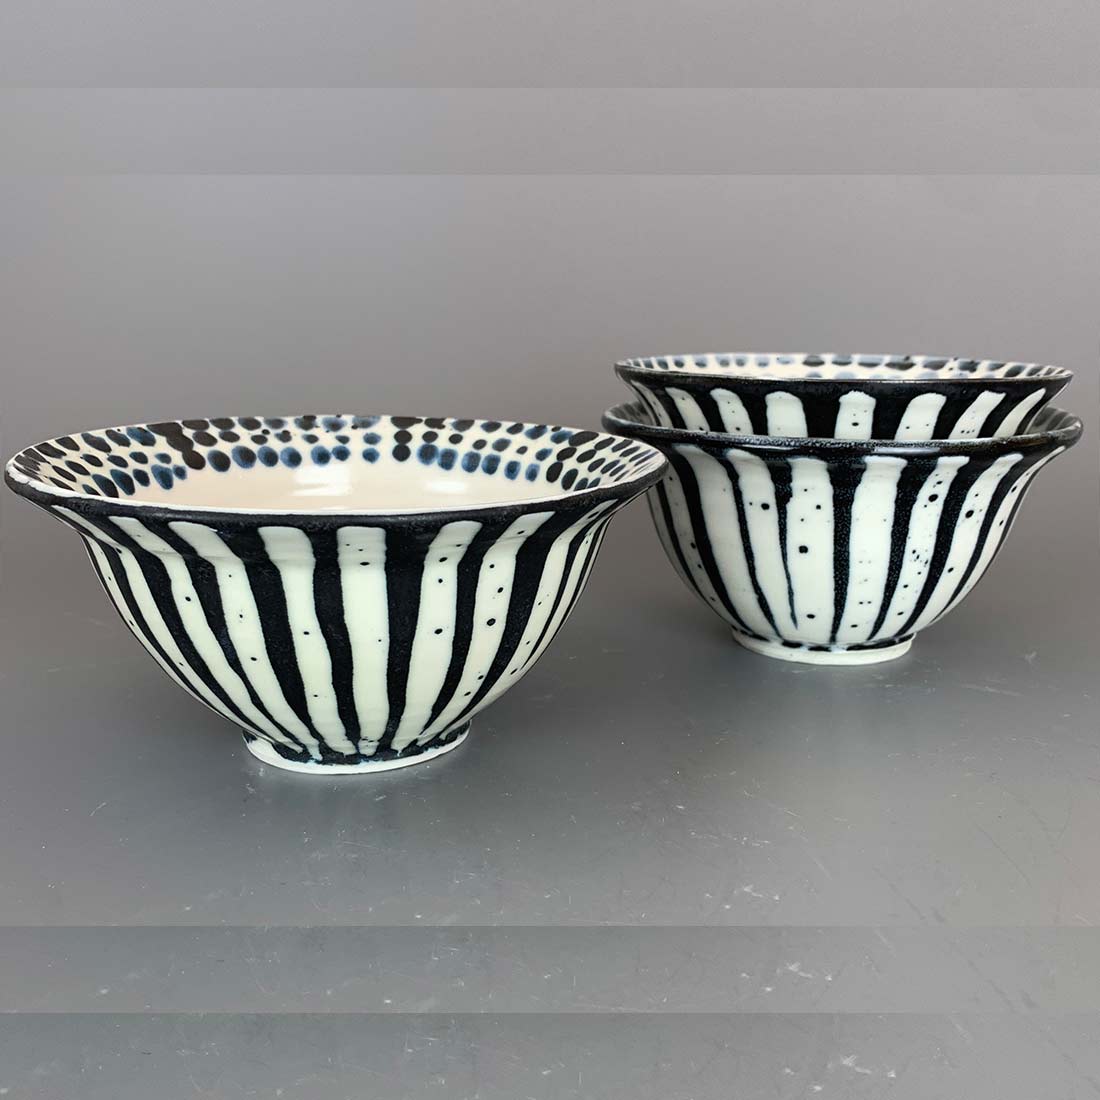 Black and White Stripe Cereal Bowl